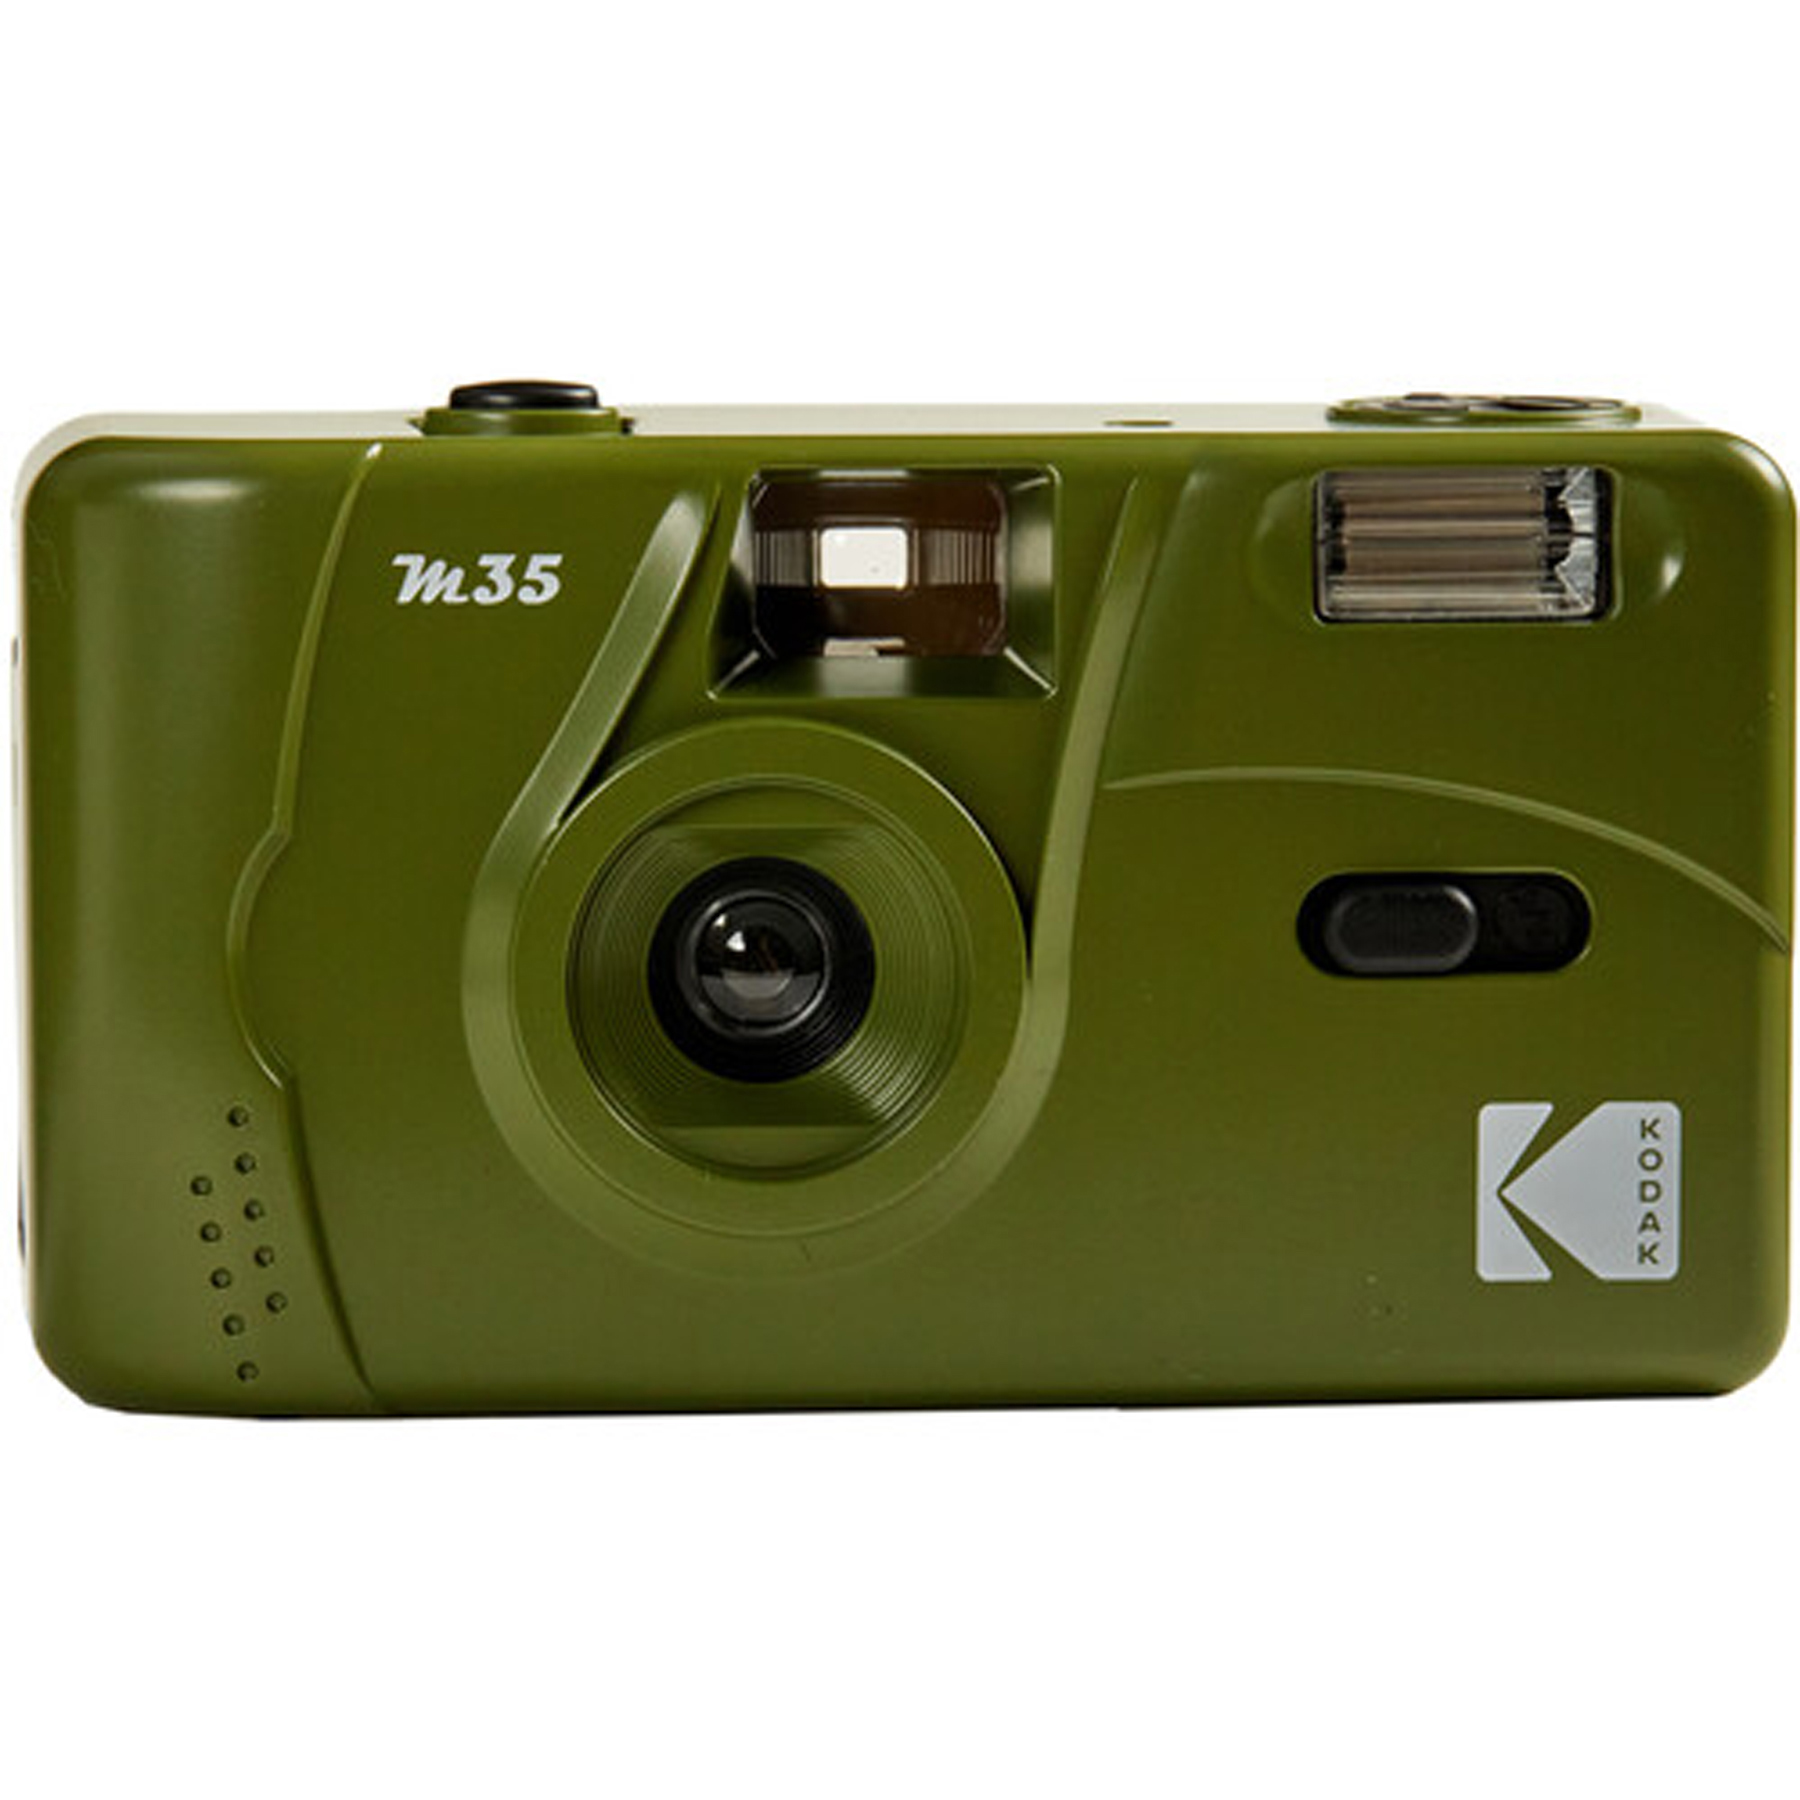 KODAK M35 – 35MM FILM CAMERA -FOCUS FREE, REUSABLE , BUILT IN FLASH , EASY TO USE – OLIVE GREEN